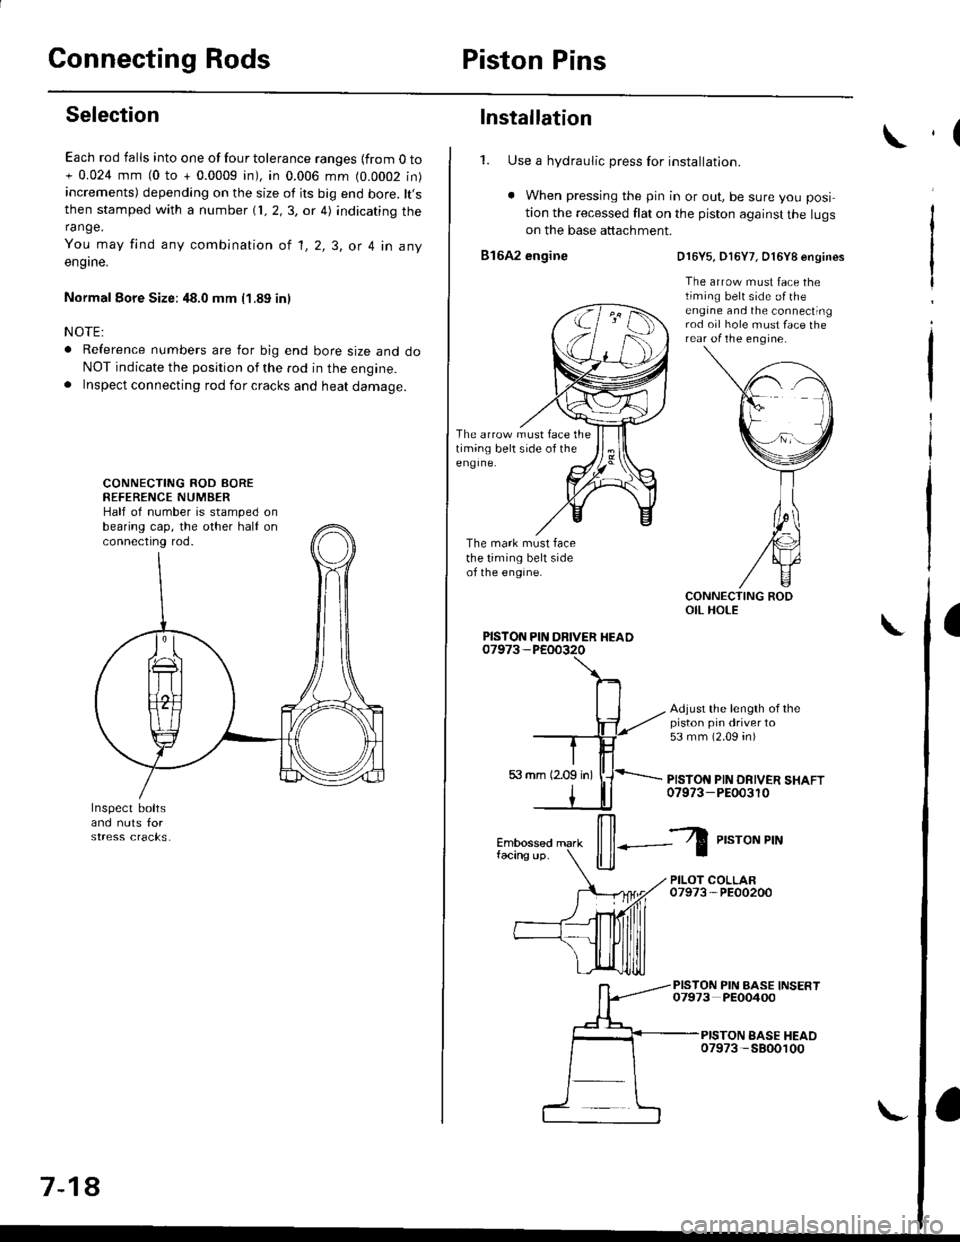 HONDA CIVIC 1996 6.G Service Manual Connecting RodsPiston Pins
Selection
Each rod falls into one of four tolerance ranges {from O to+ 0.024 mm (0 to + 0.0009 in), in 0.006 mm (0.0002 in)increments) depending on the size of its big end b